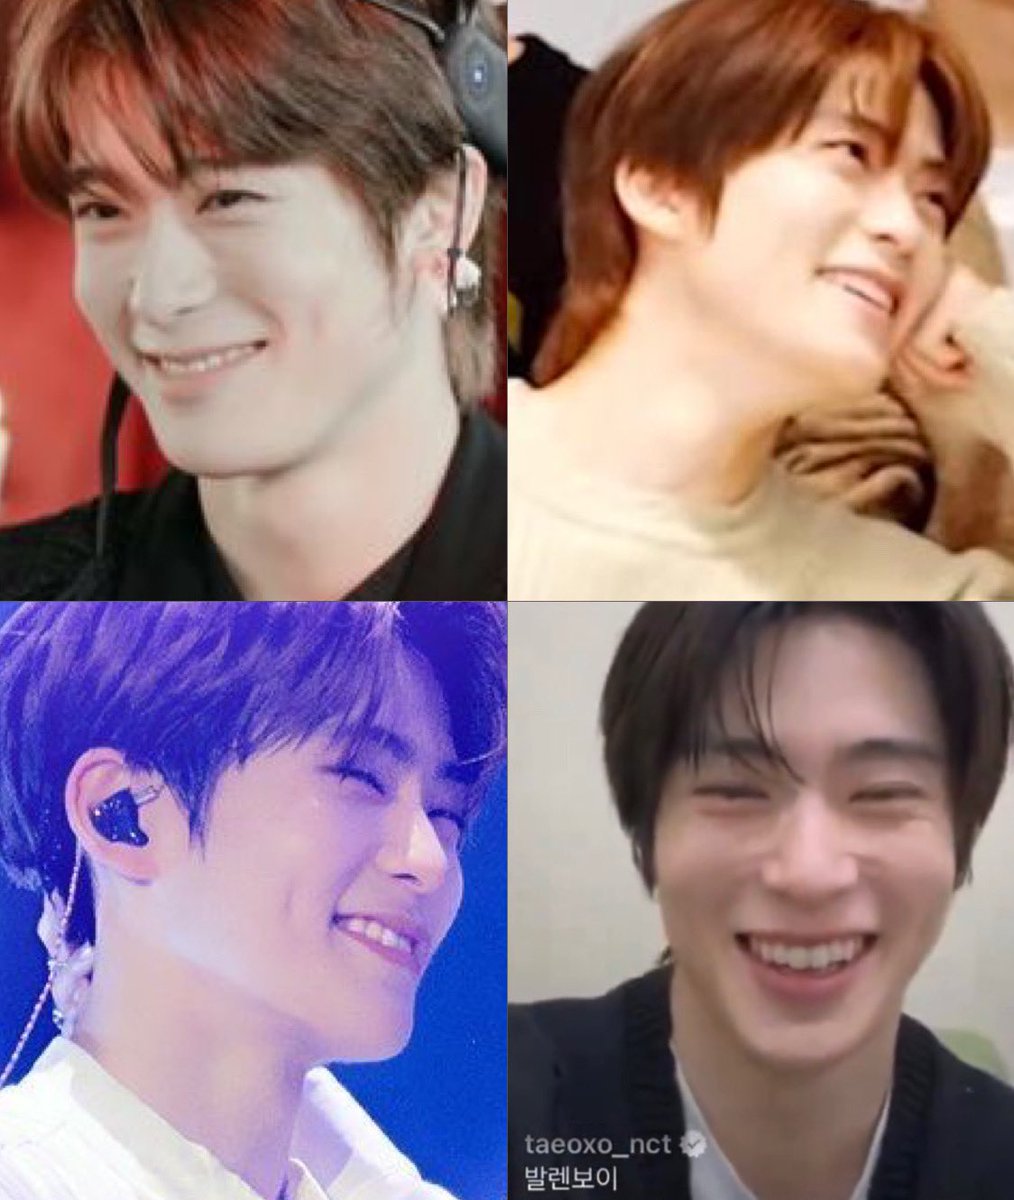 when you realize it’s that one same hyung that makes his eyes crinkle like that from smiling too hard 🥹